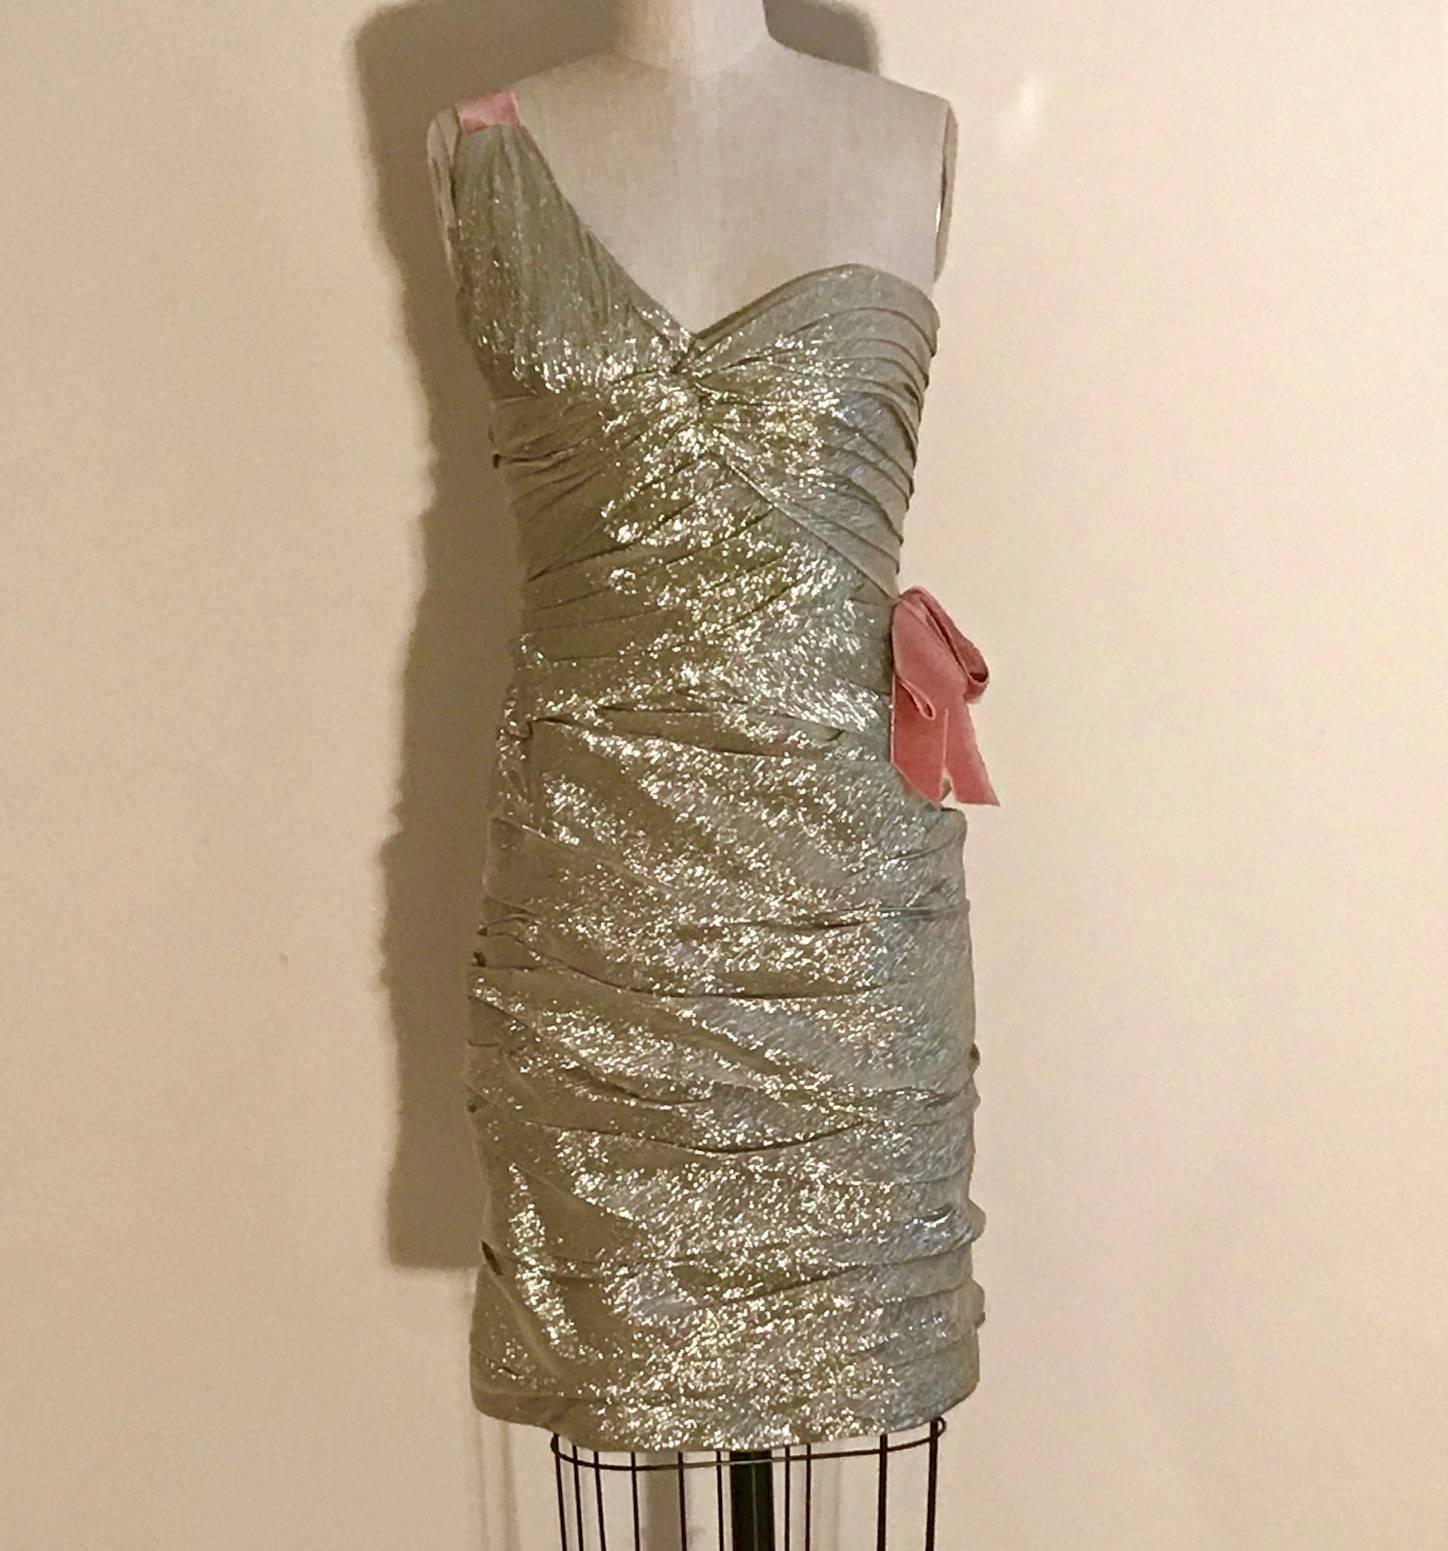 Oscar de la Renta metallic light gold pleated cocktail dress with pink velvet detail at a small side bow and the strap. Built in corseted detail at top. Back zip and hook. 

70% silk, 30% polyester.
Fully lined in 100% silk. 
100% rayon velvet